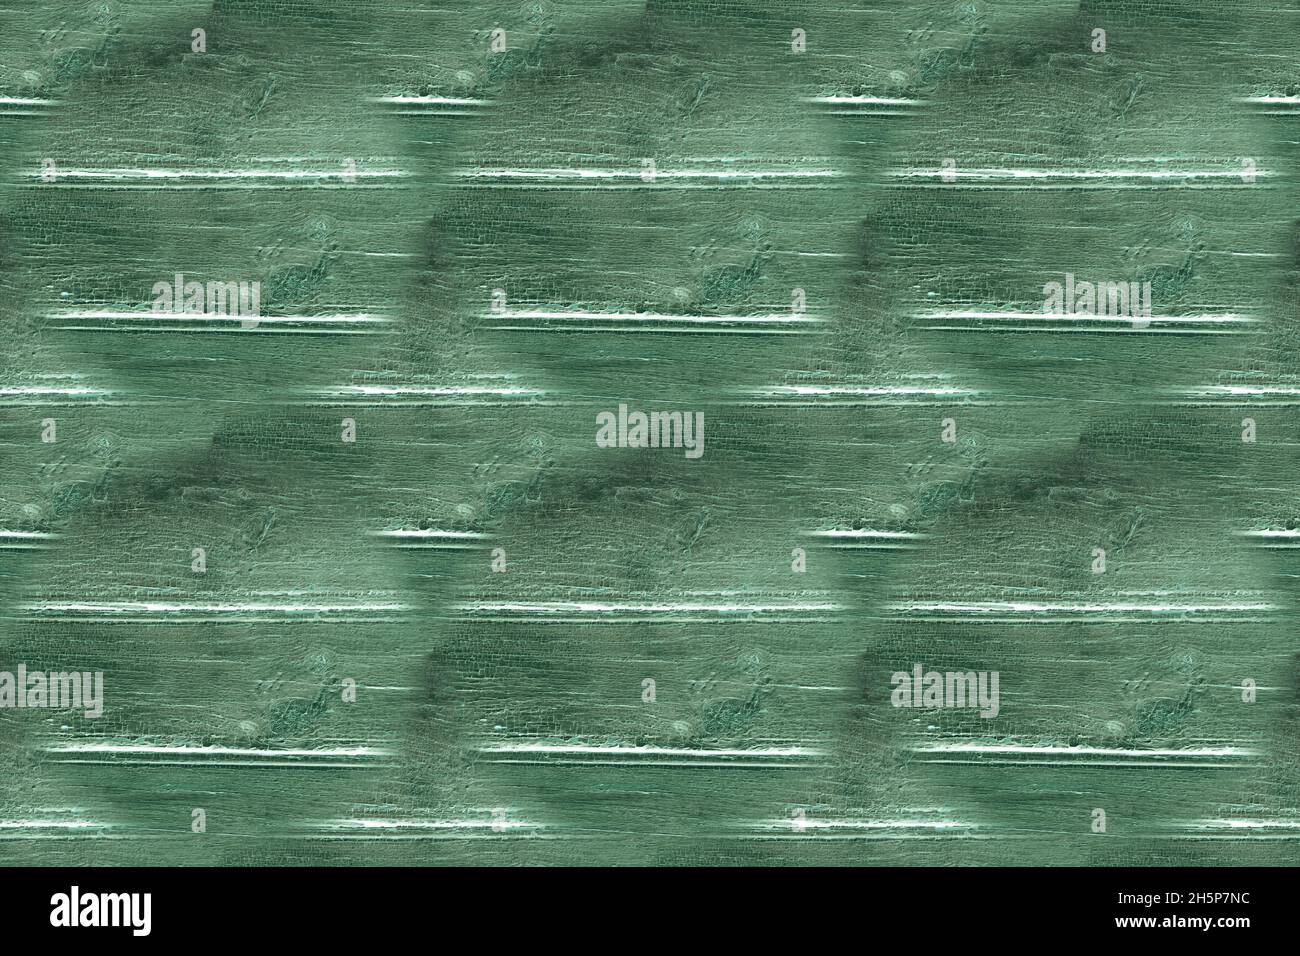 Green Damaged Poster. Distress Wooden Surface. Stock Photo